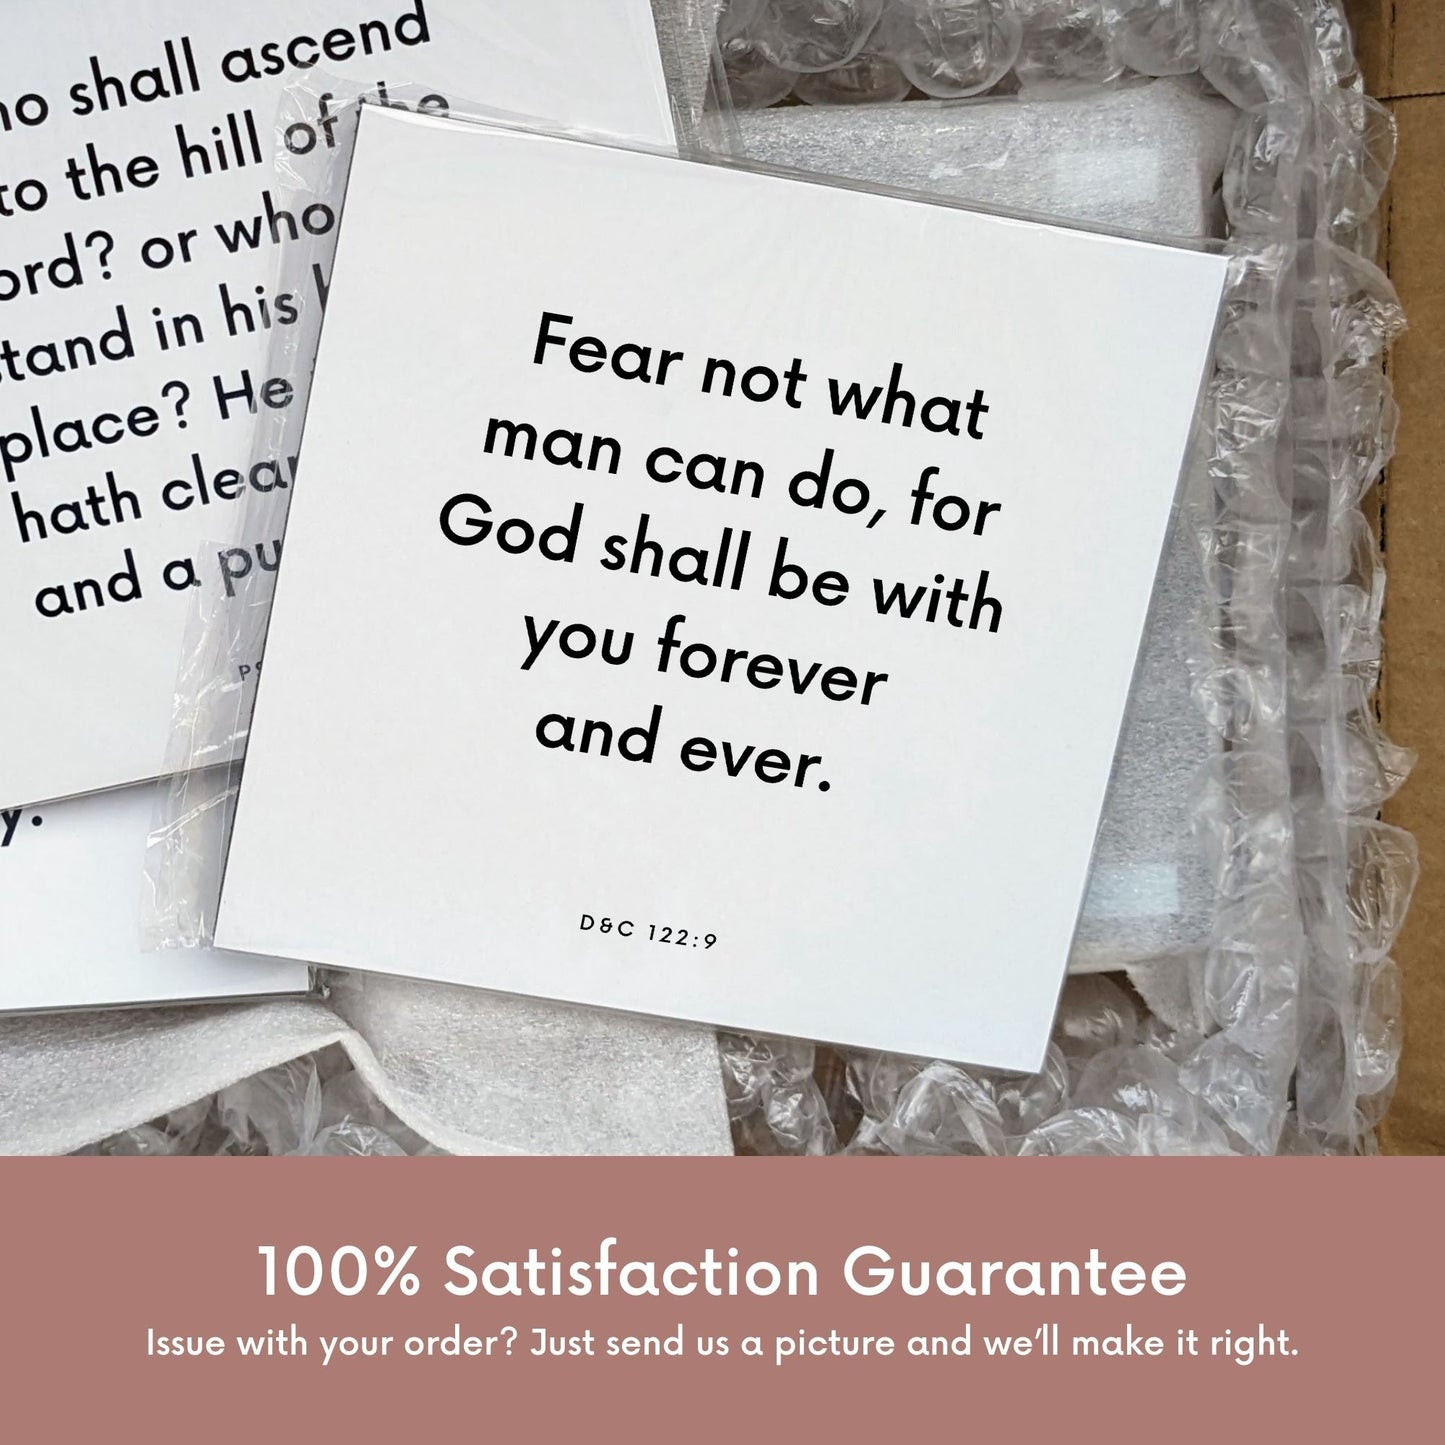 Shipping materials for scripture tile of D&C 122:9 - "Fear not what man can do"